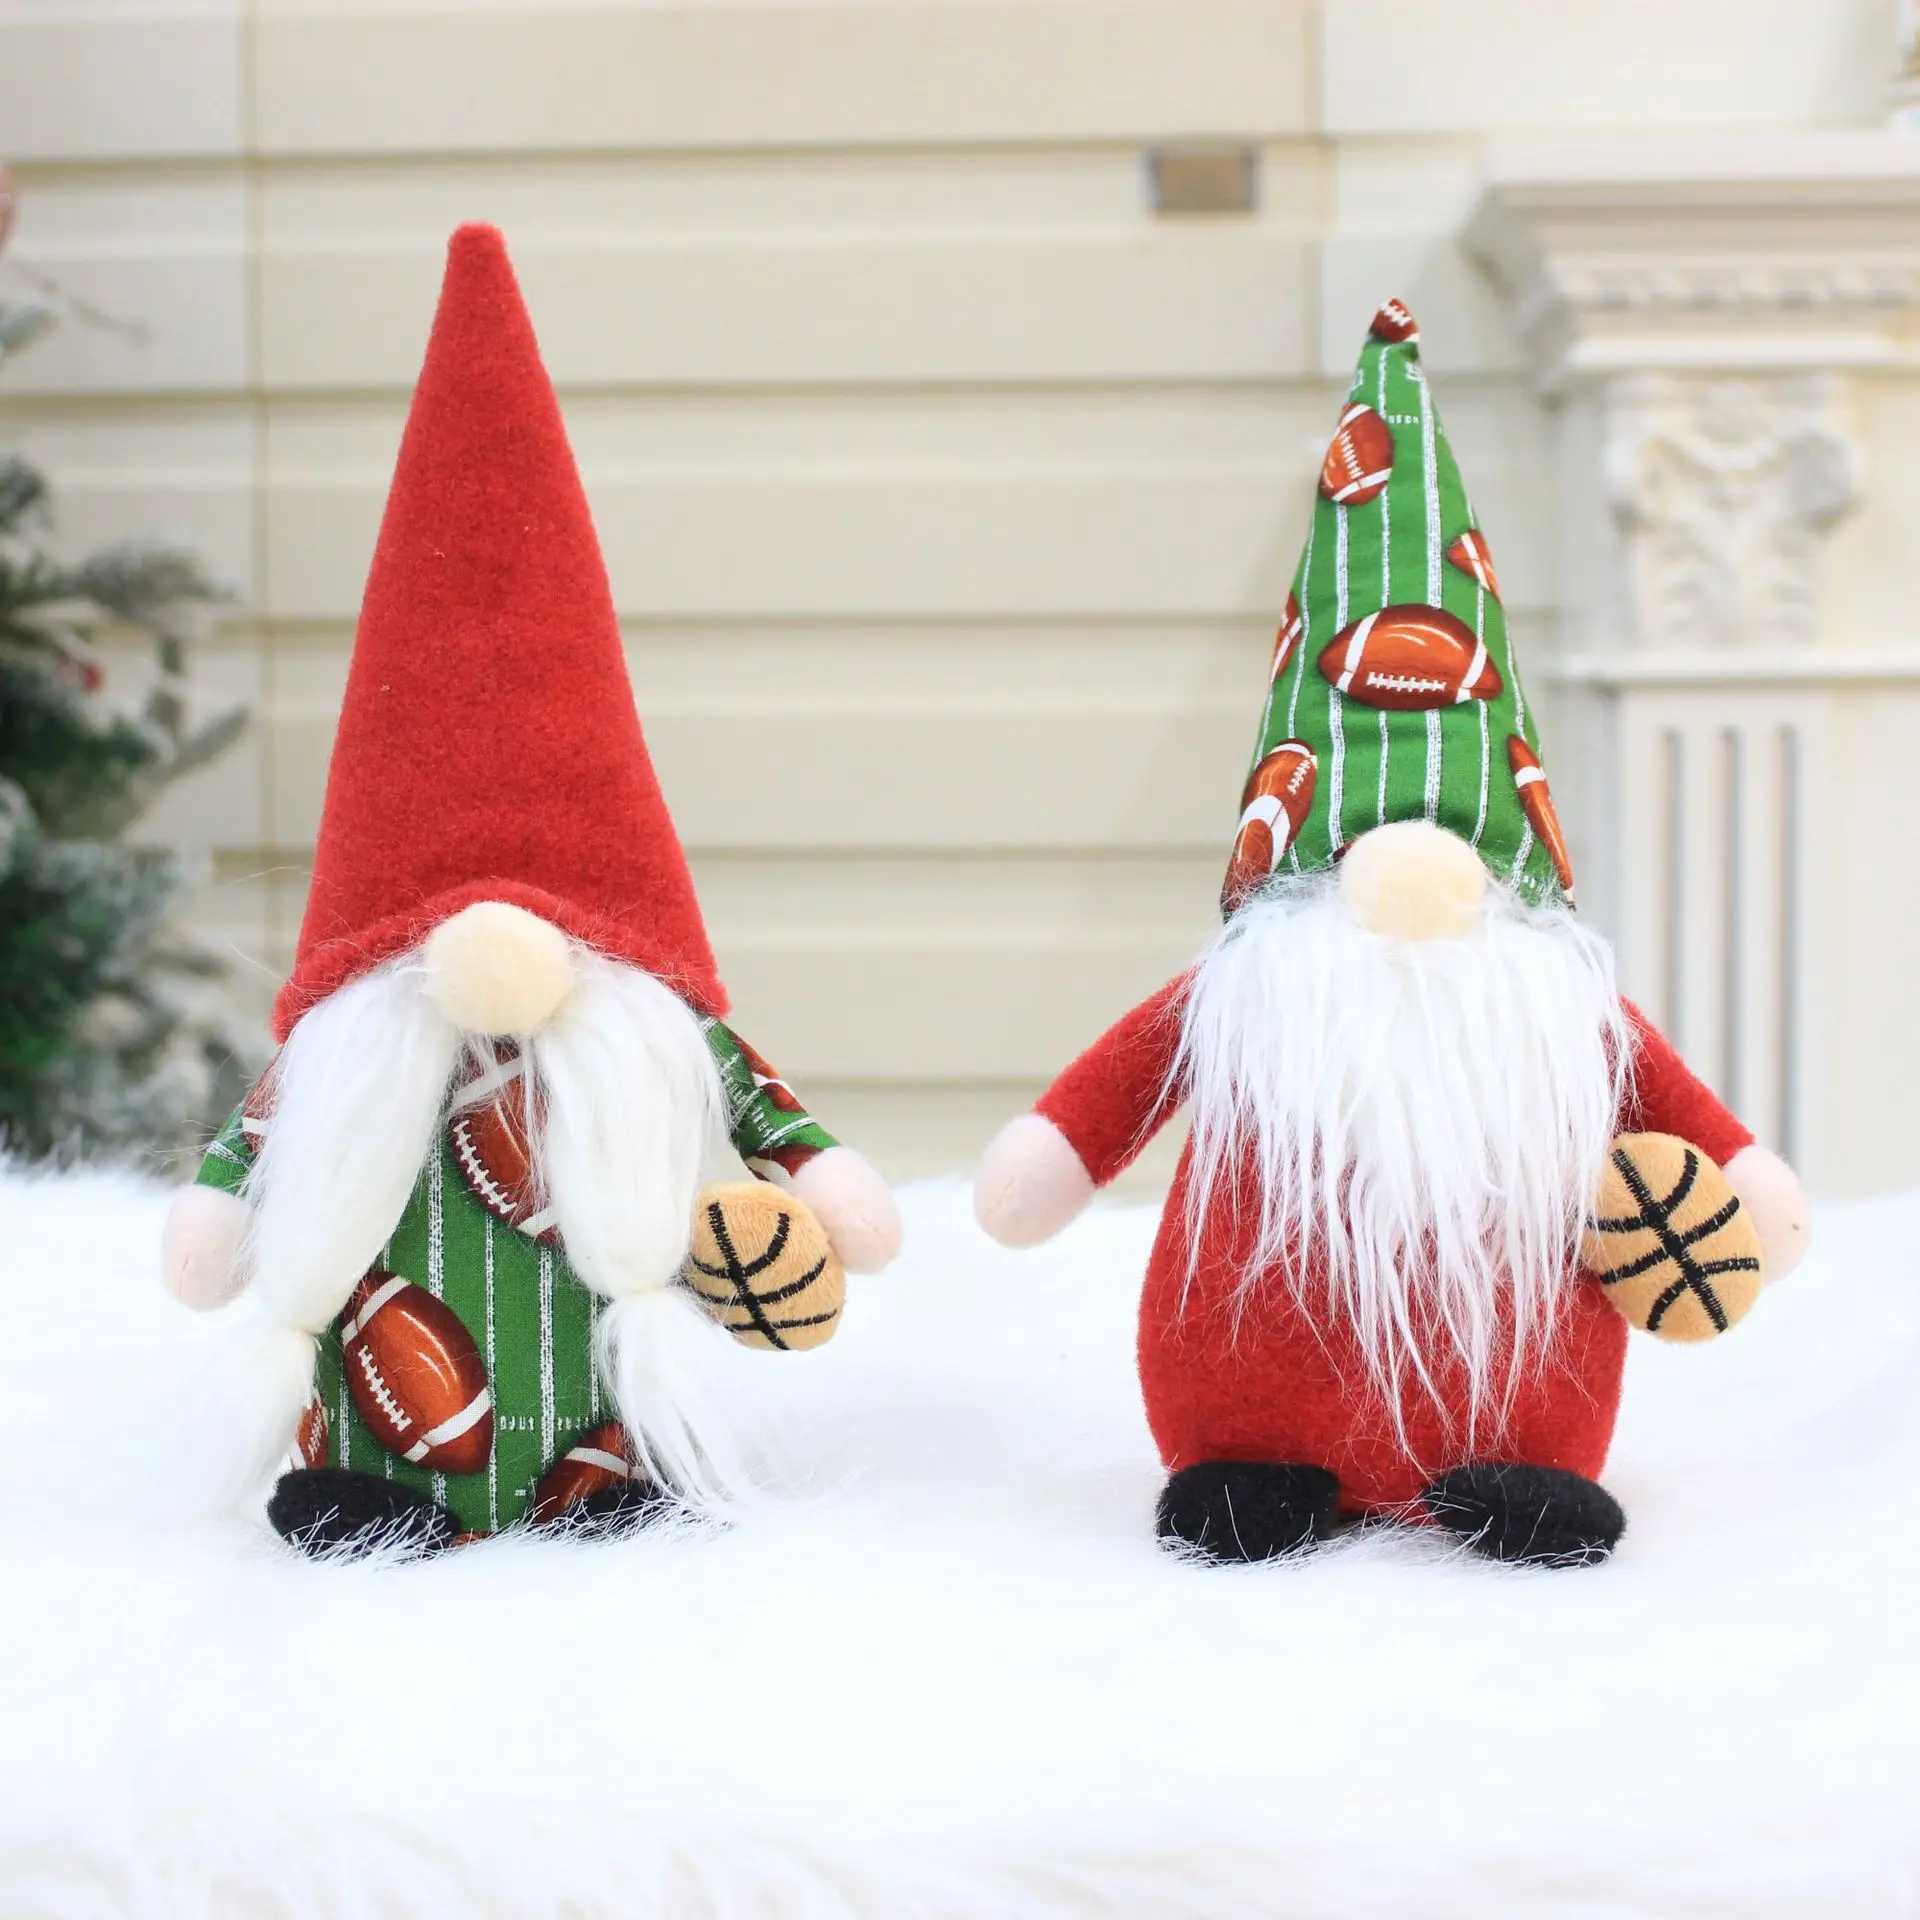 Details about   1PC Christmas Faceless Doll Ornament Santa Christmas Tree Hanging Ornaments US 